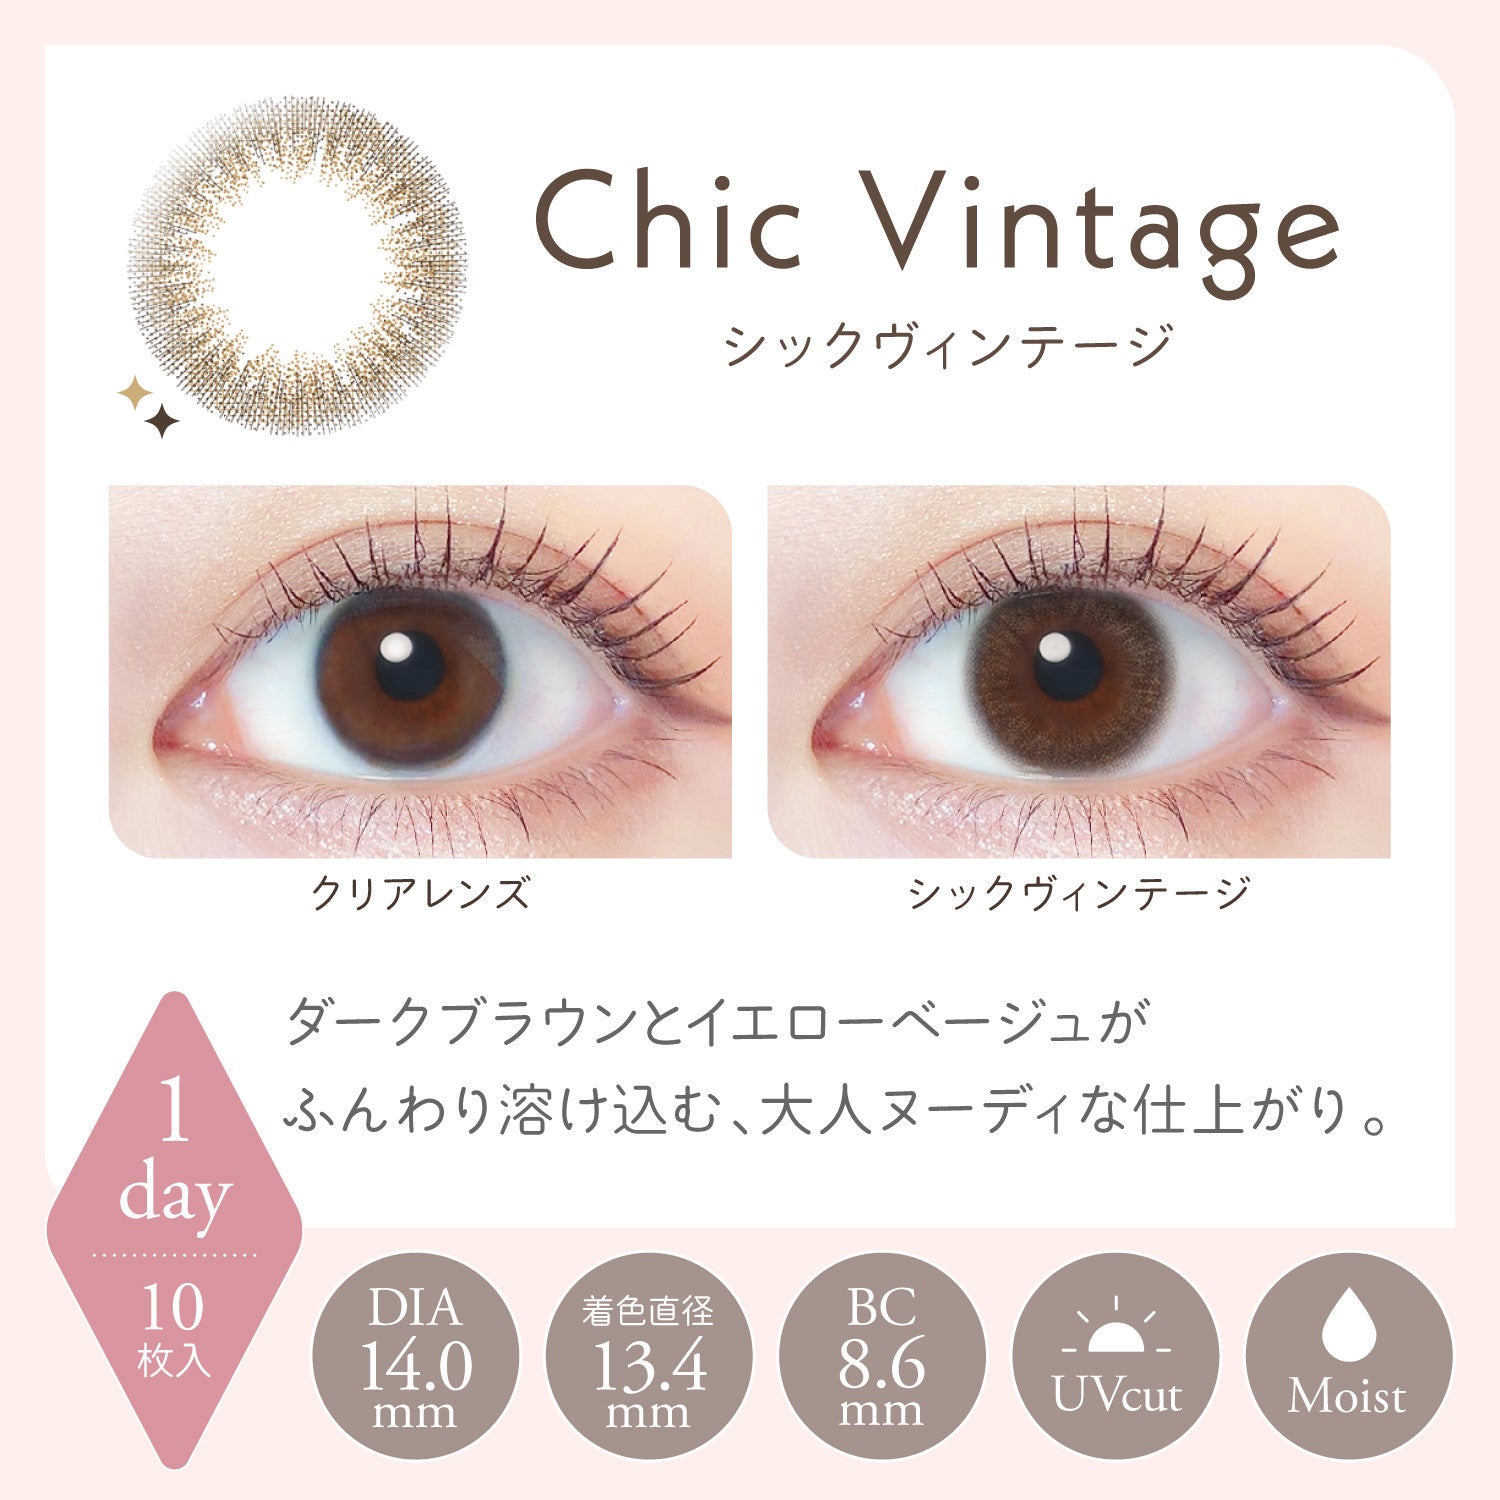 Chic Vintage | 1day